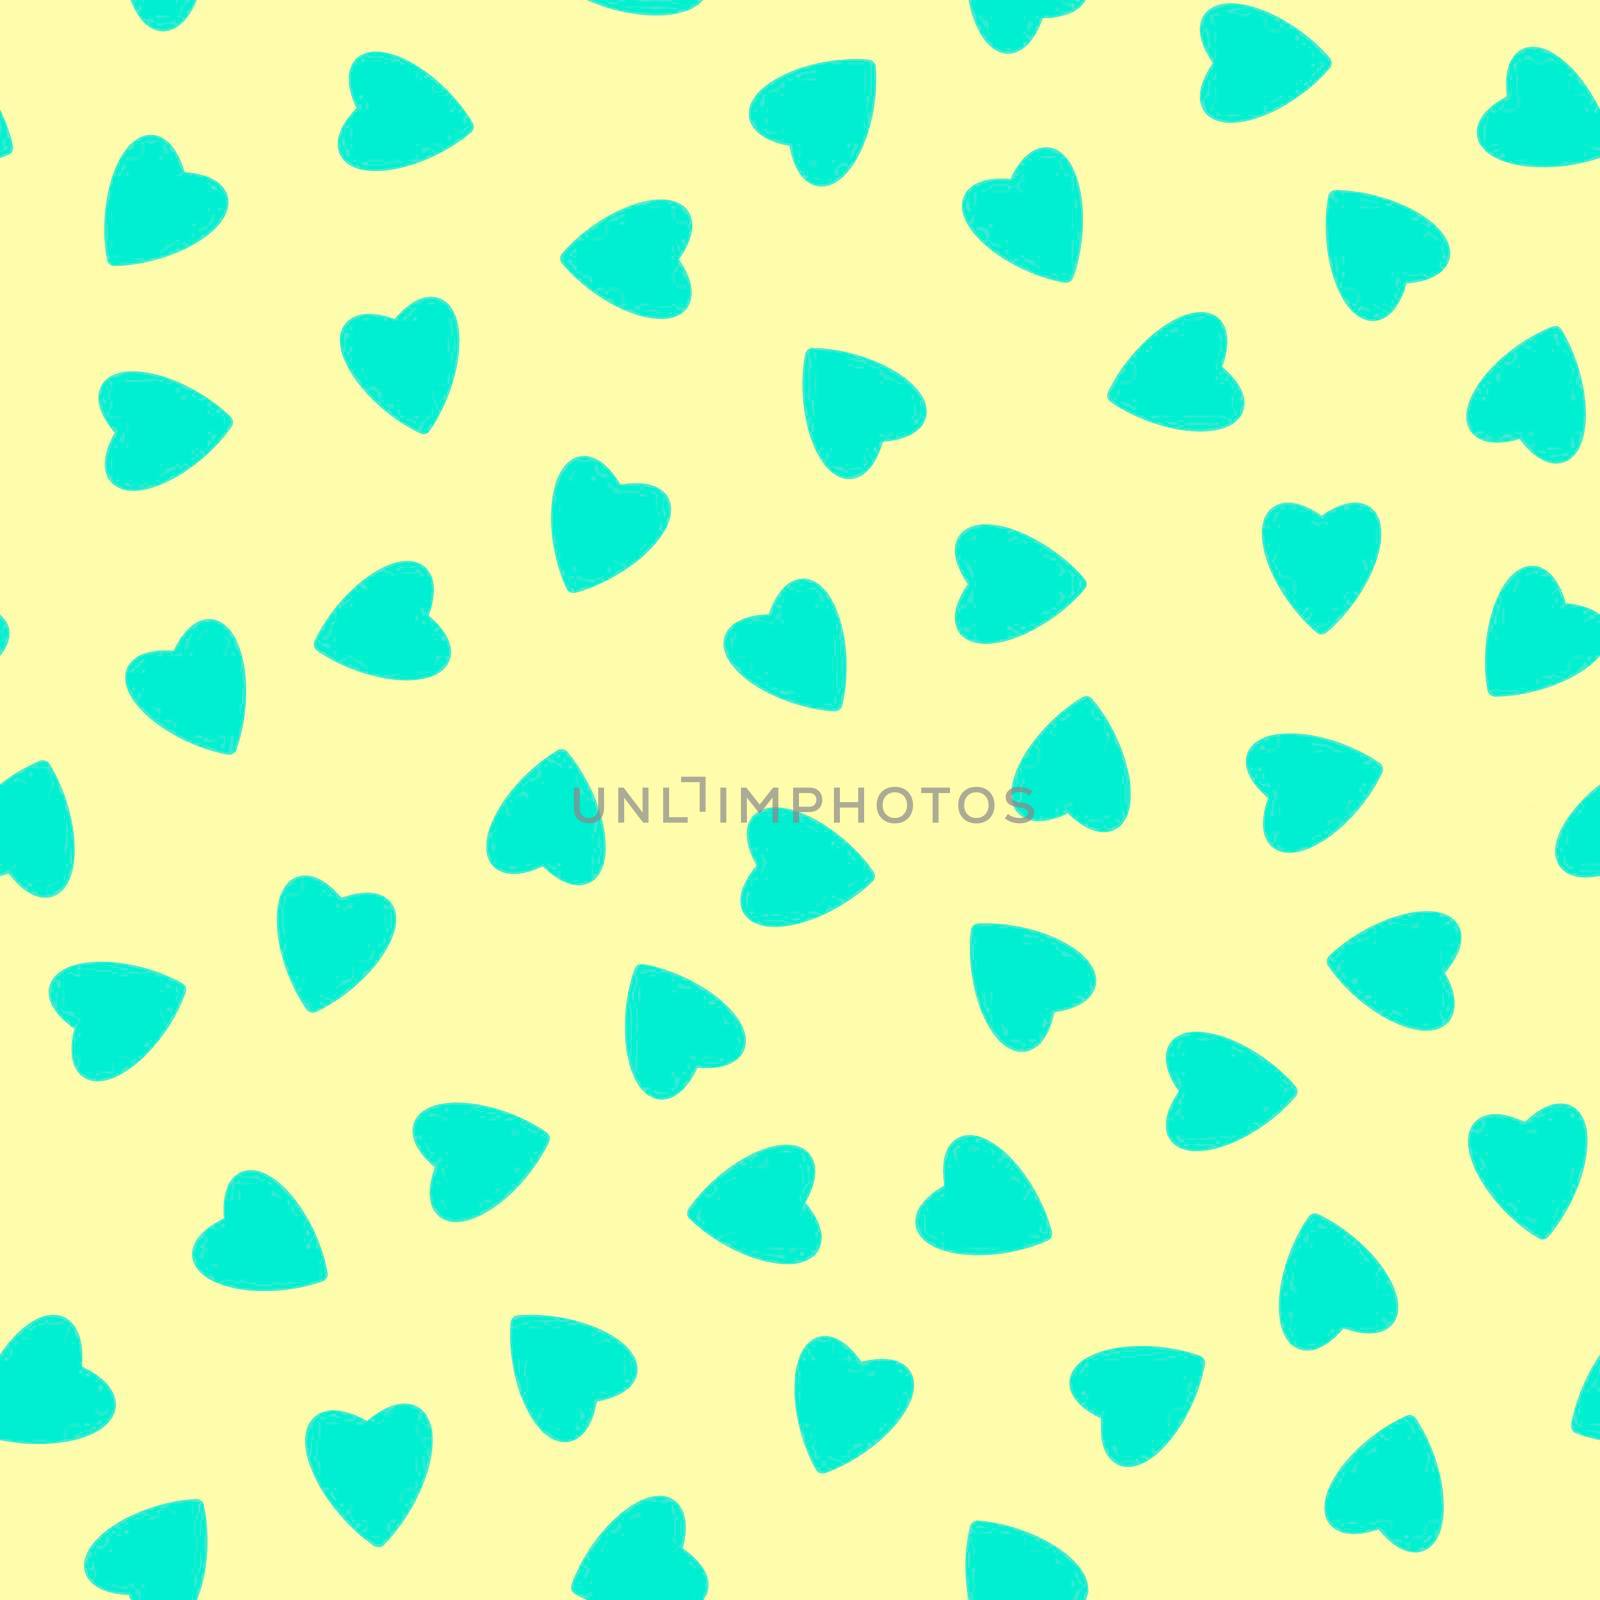 Simple hearts seamless pattern,endless chaotic texture made of tiny heart silhouettes.Valentines,mothers day background.Great for Easter,wedding,scrapbook,gift wrapping paper,textiles.Azure on Ivory by Angelsmoon